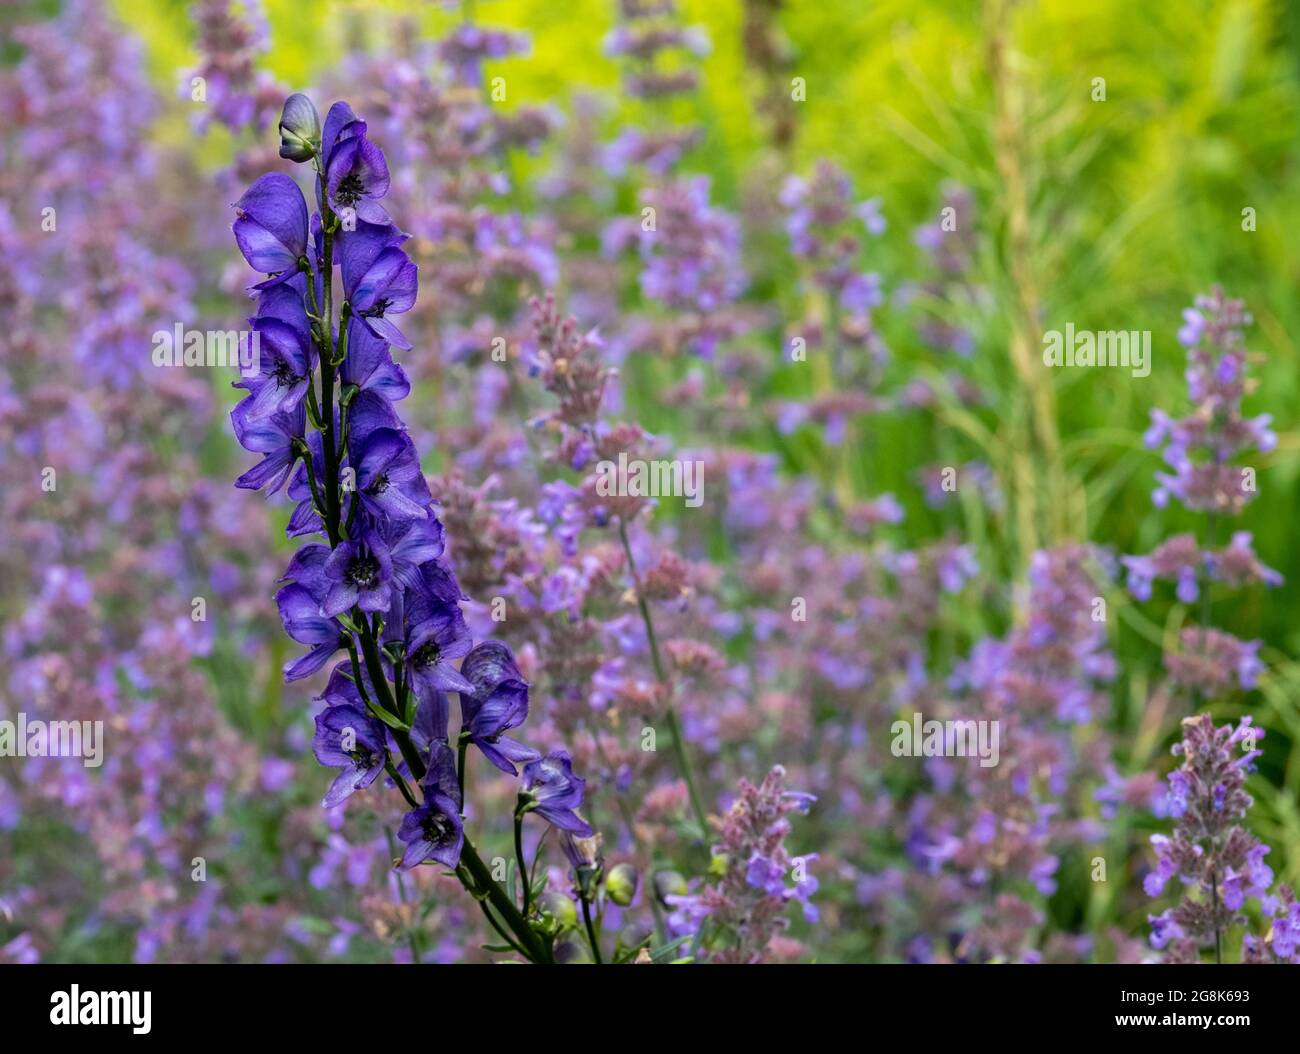 Dark purple delphinium flower in the foreground, and light purple Catmint flowers, also known as Nepeta Racemosa or Walker's Low behind. Stock Photo